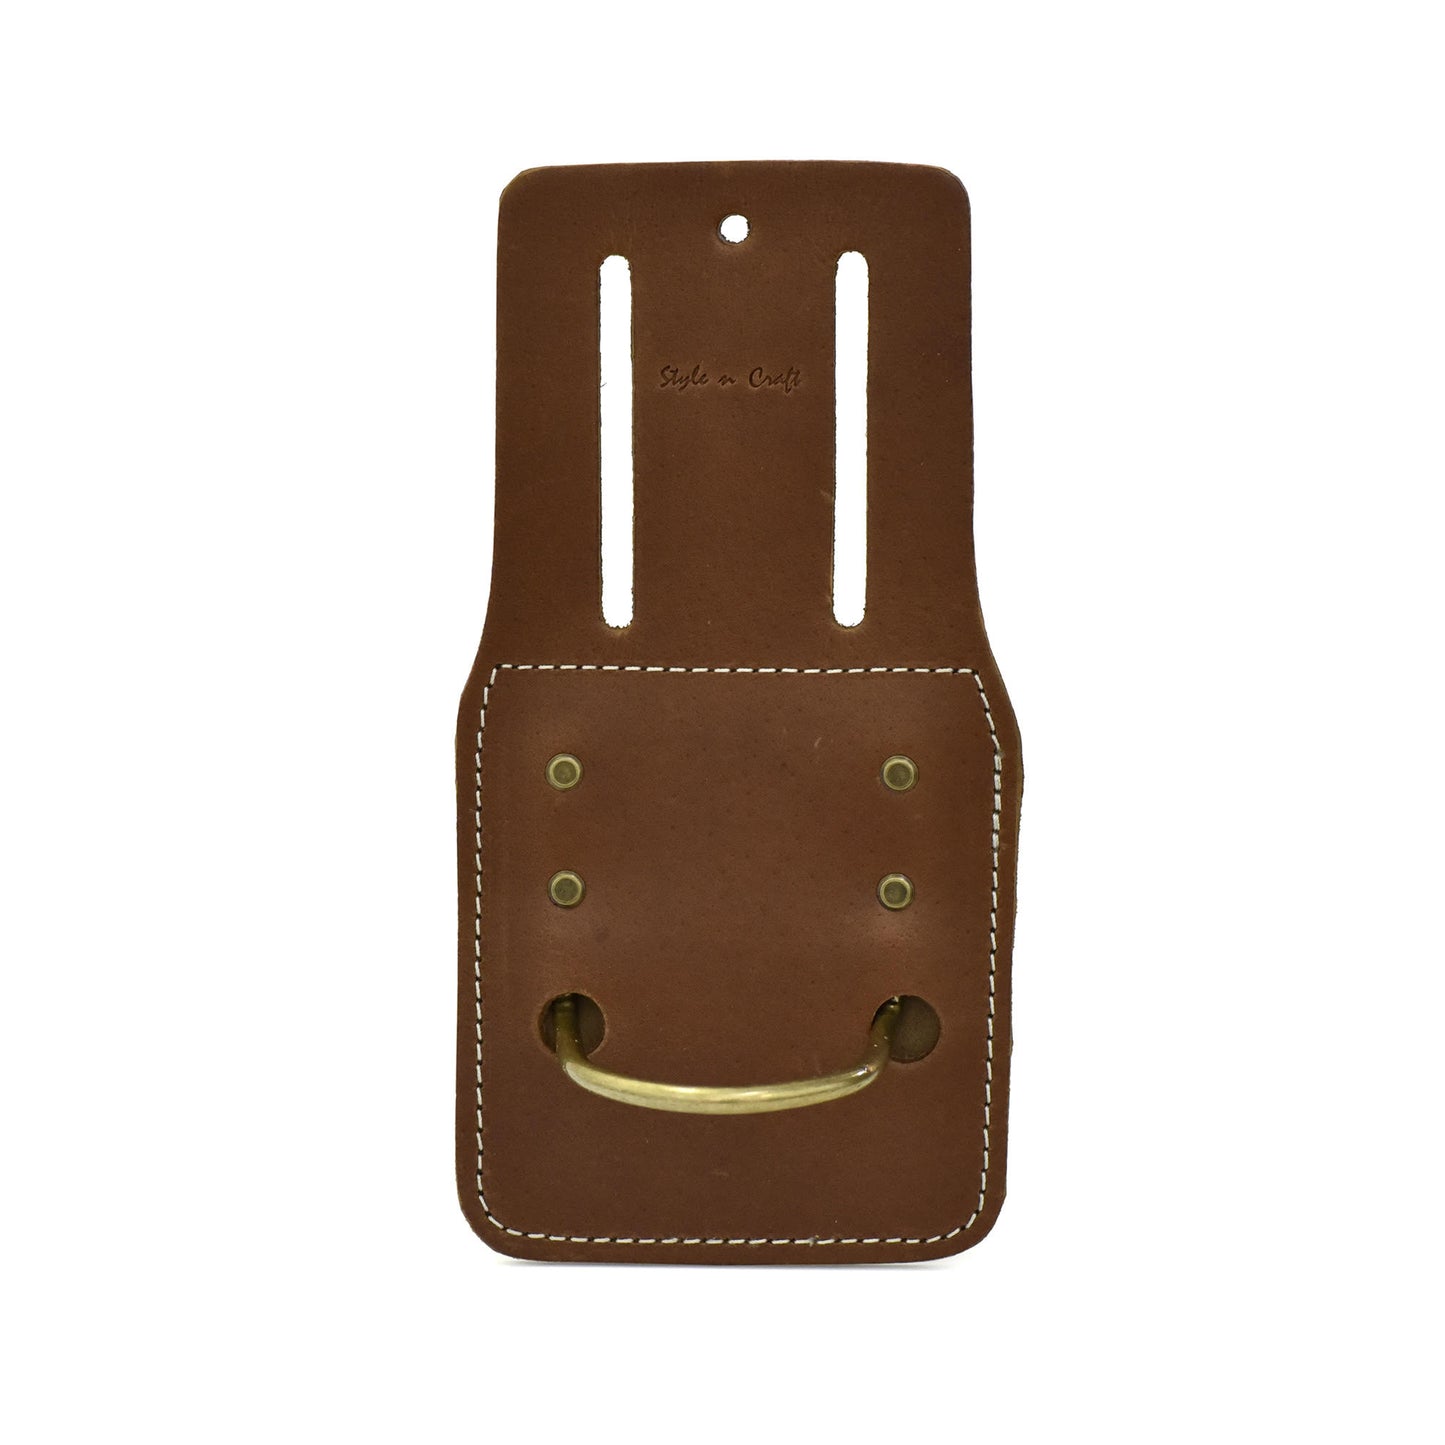 Style n Craft 98438 - Fixed Hammer / Hatchet Holder in Heavy Top Grain Leather in Dark Tan Color